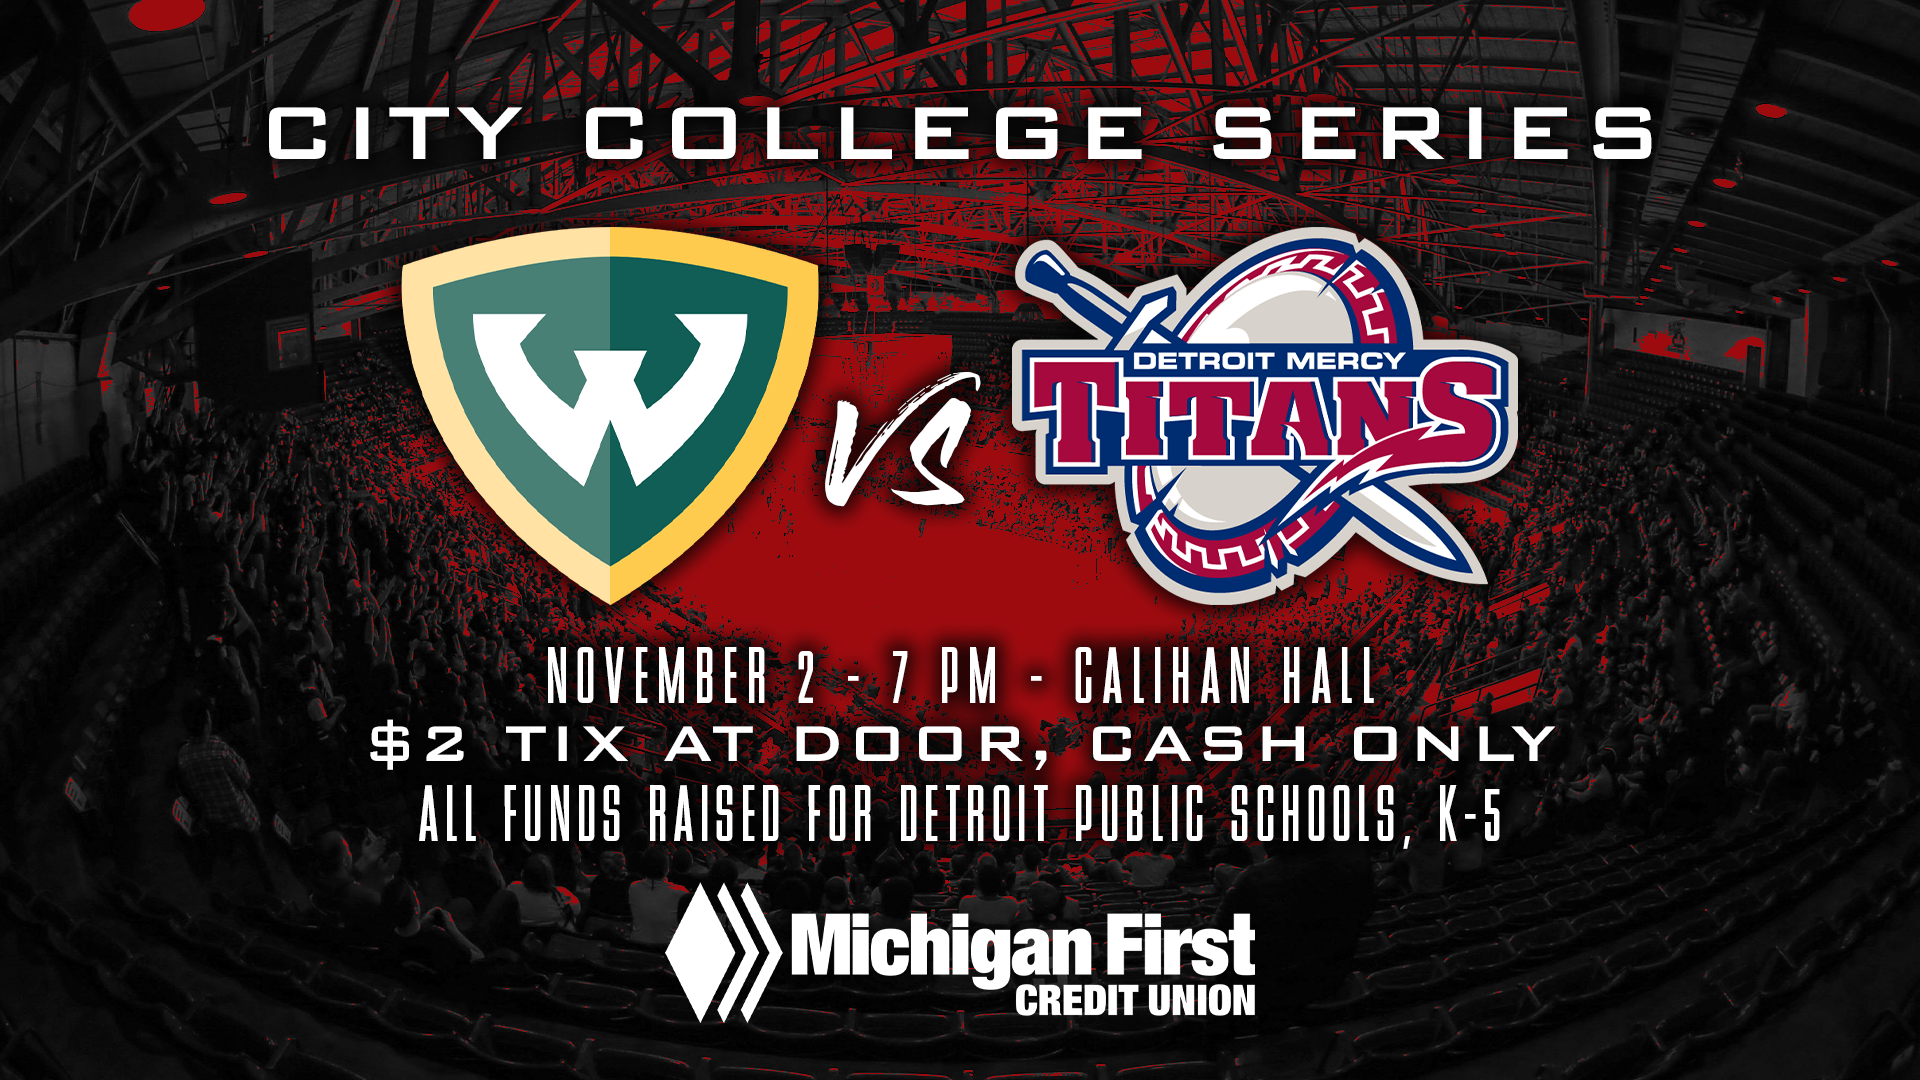 A graphic featuring logos for Wayne State, Detroit Mercy Titans and Michigan First Credit Union for the City College Series. Additional text reads November 2, 7 p.m., Calihan Hall, $2 tix at door, cash only, all funds raised for Detroit Public Schools, K-5.